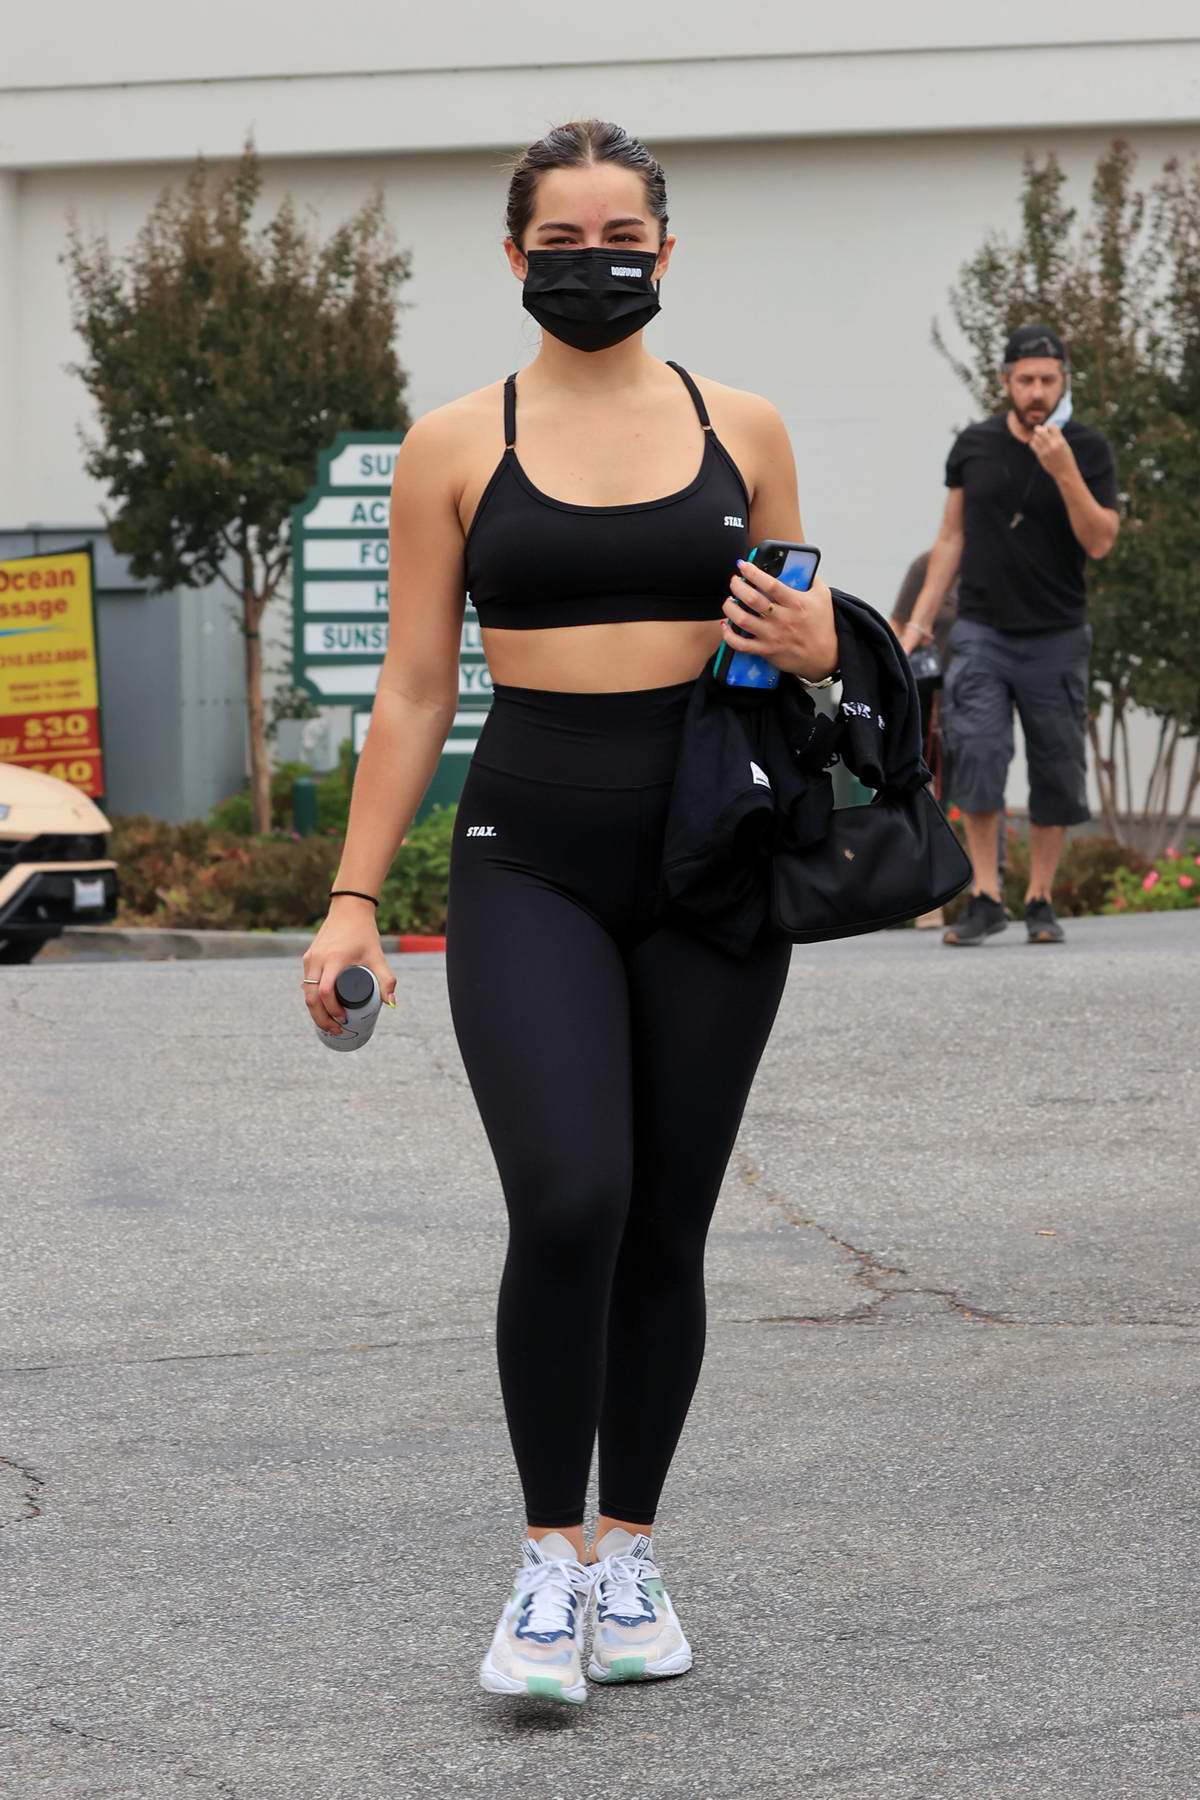 Addison Rae looks great in black sports bra and leggings as she